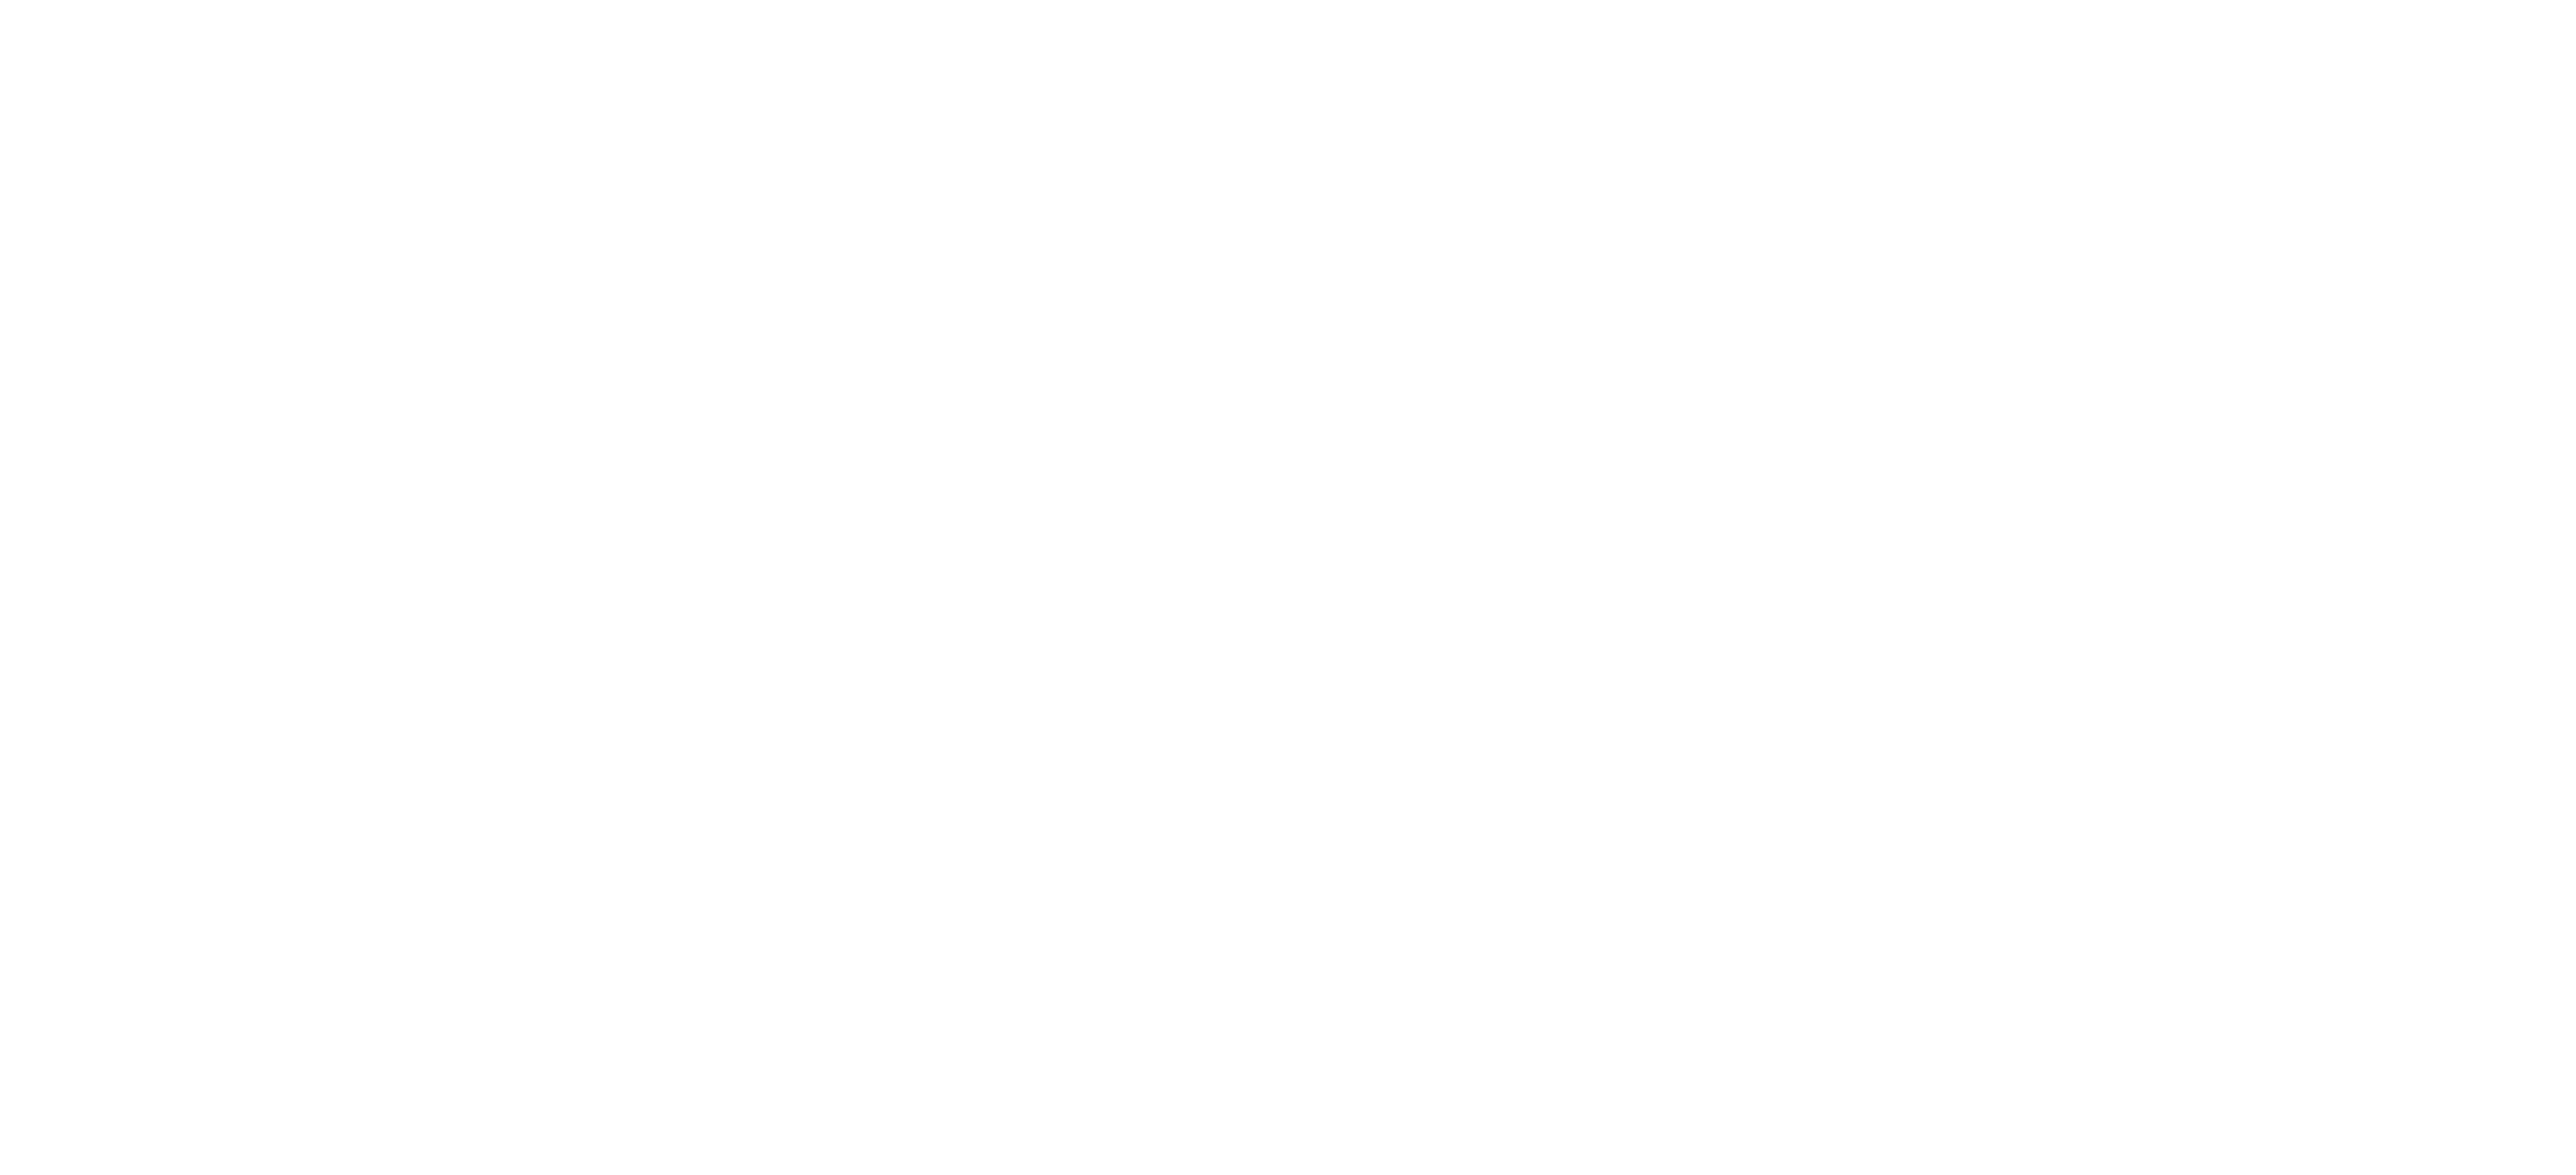 Christmas in Evergreen: Letters to Santa logo